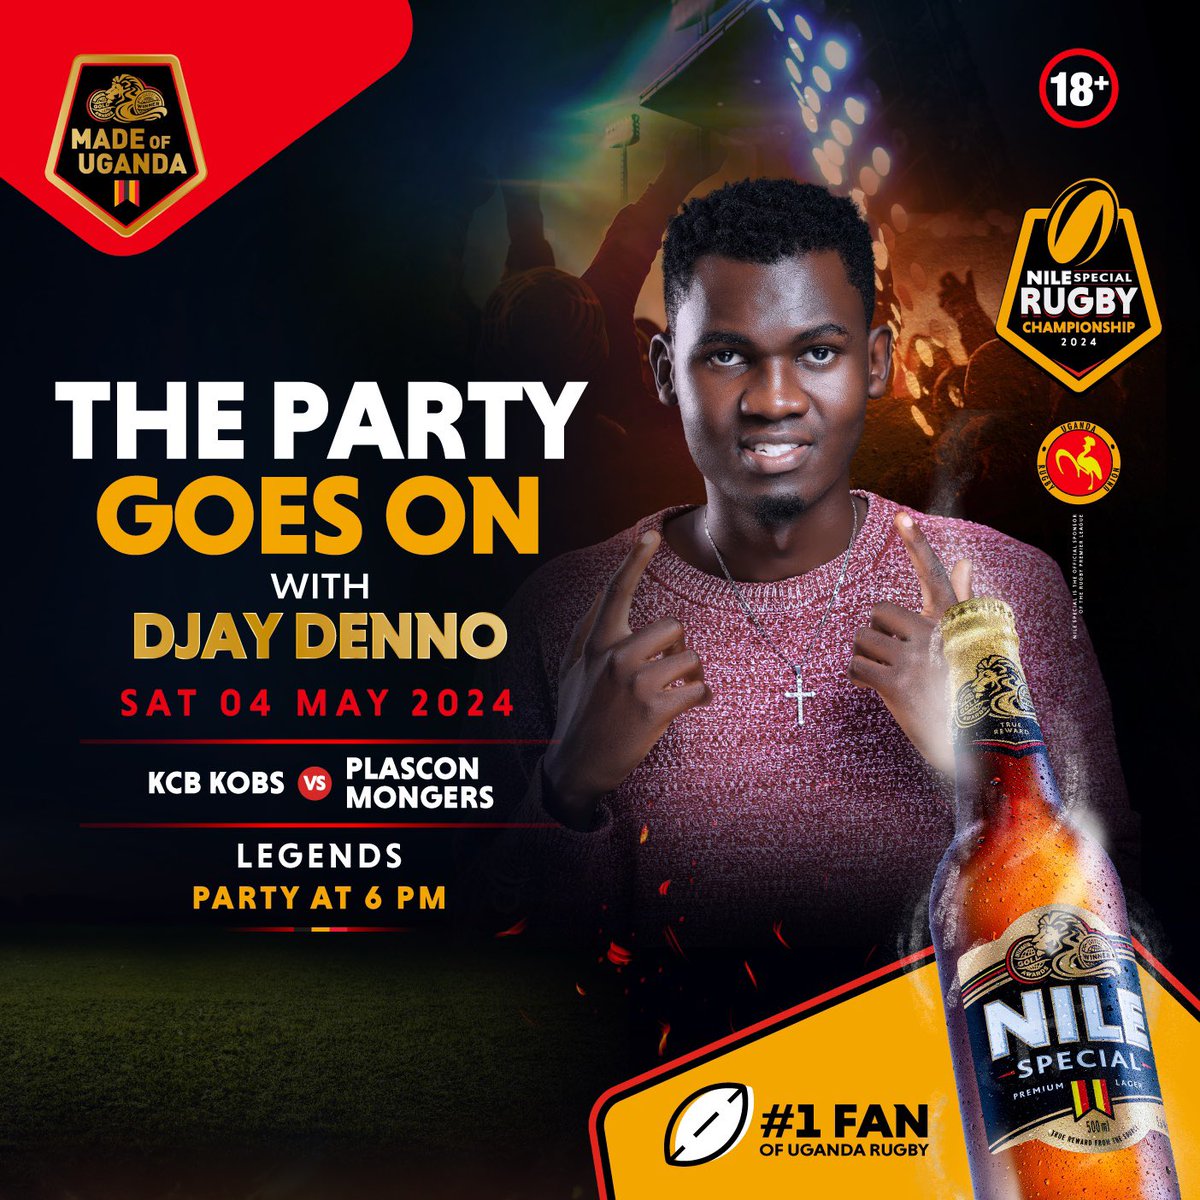 Will be playing at legends later on tonight on that KCB KOBS VS PLASCON MONGERS after match party set between 8:00pm - 10pm Courtesy of @NileSpecial